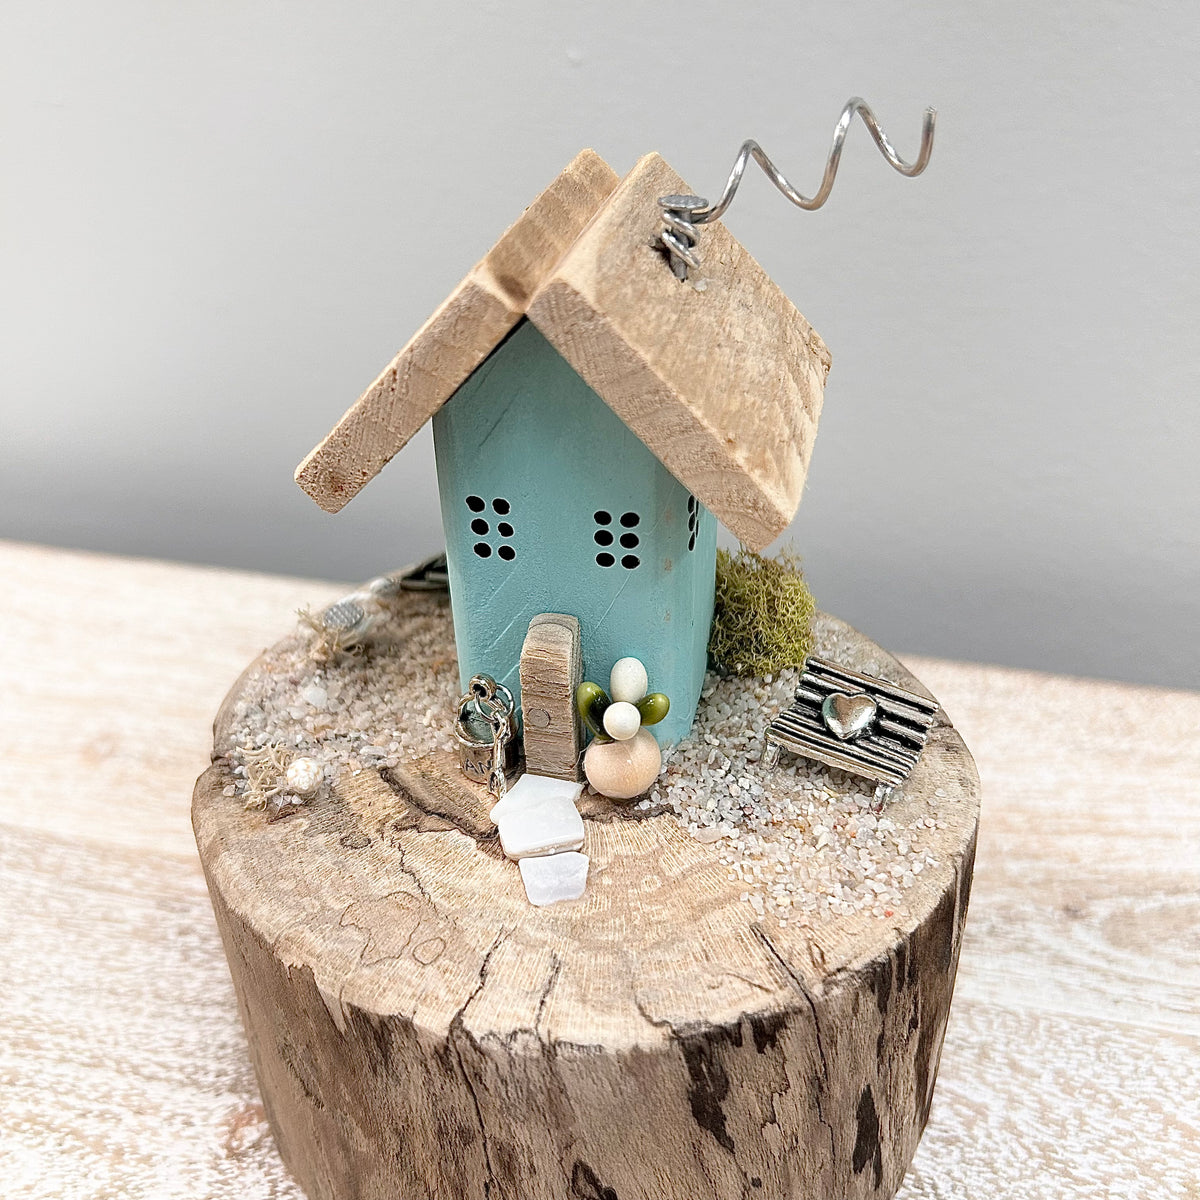 Teal Driftwood Cottage w/ Bench and Boat